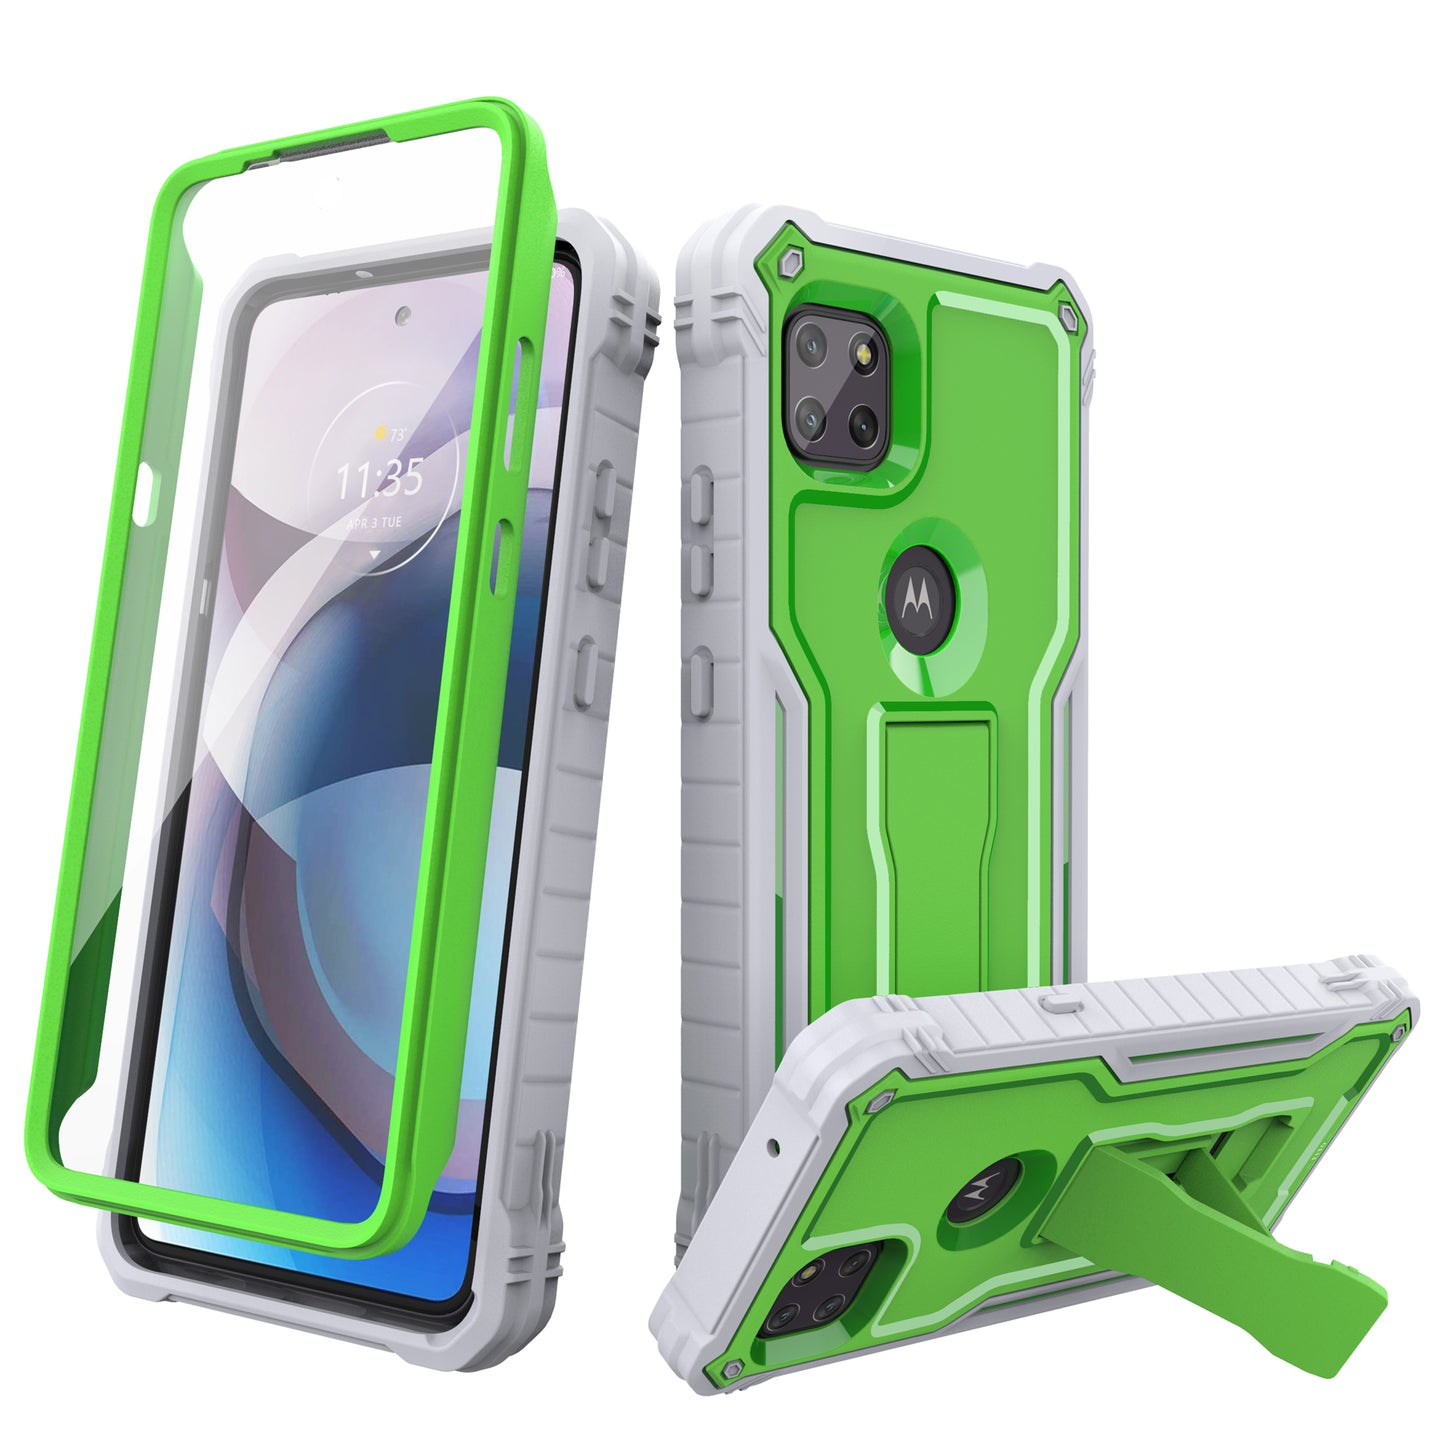 FITO for Moto One 5G ACE Case, Dual Layer Shockproof Heavy Duty Case for Motorola One 5G ACE Phone with Screen Protector, Built-in Kickstand